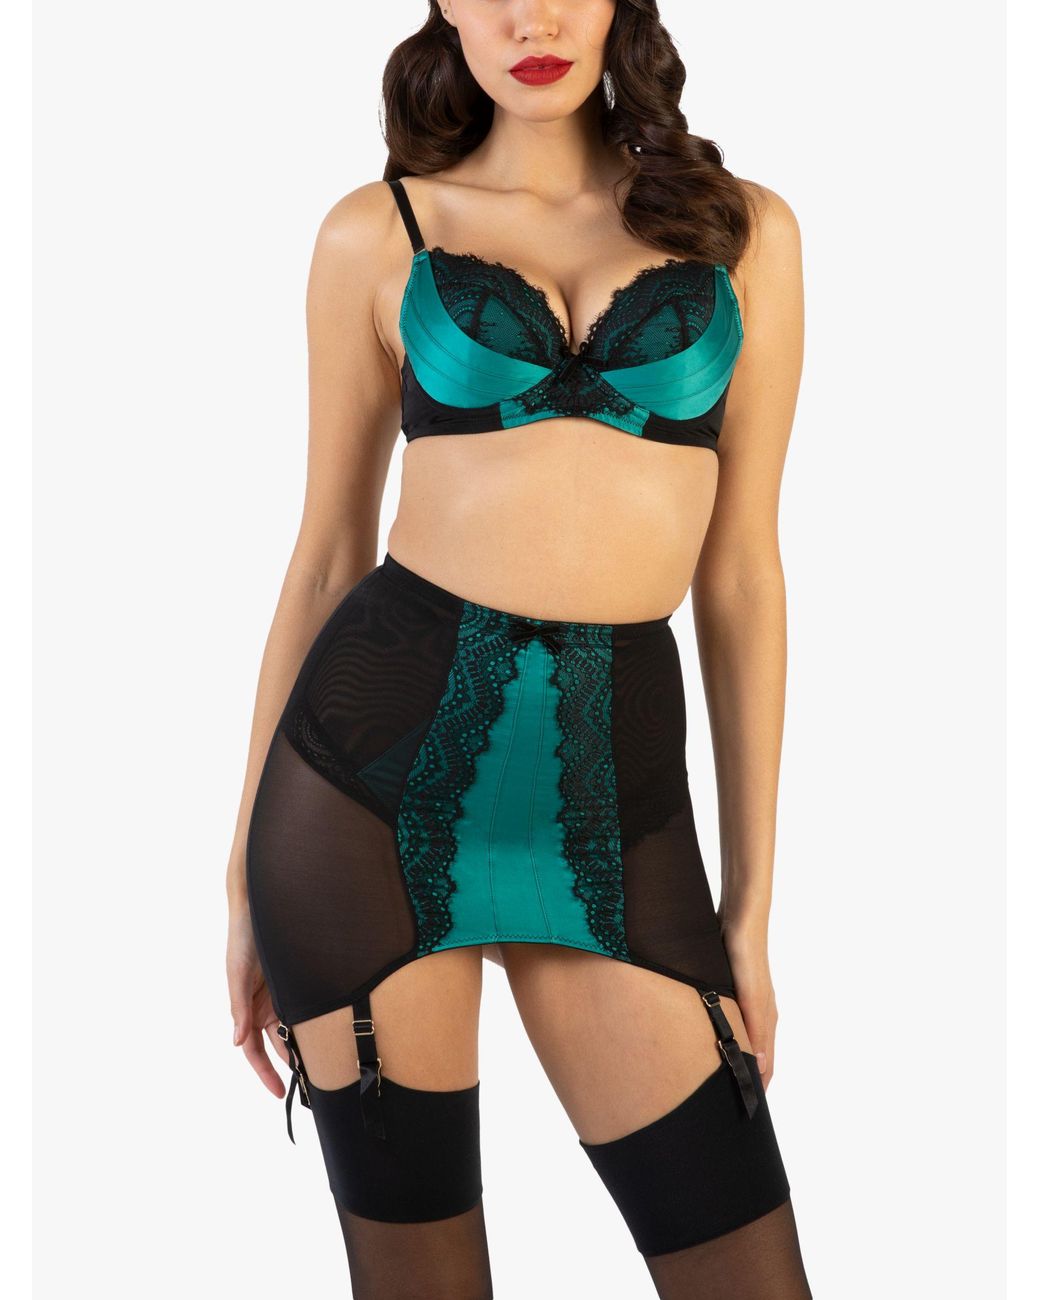 Playful Promises Blue Bettie Page Melda Satin And Lace Girdle